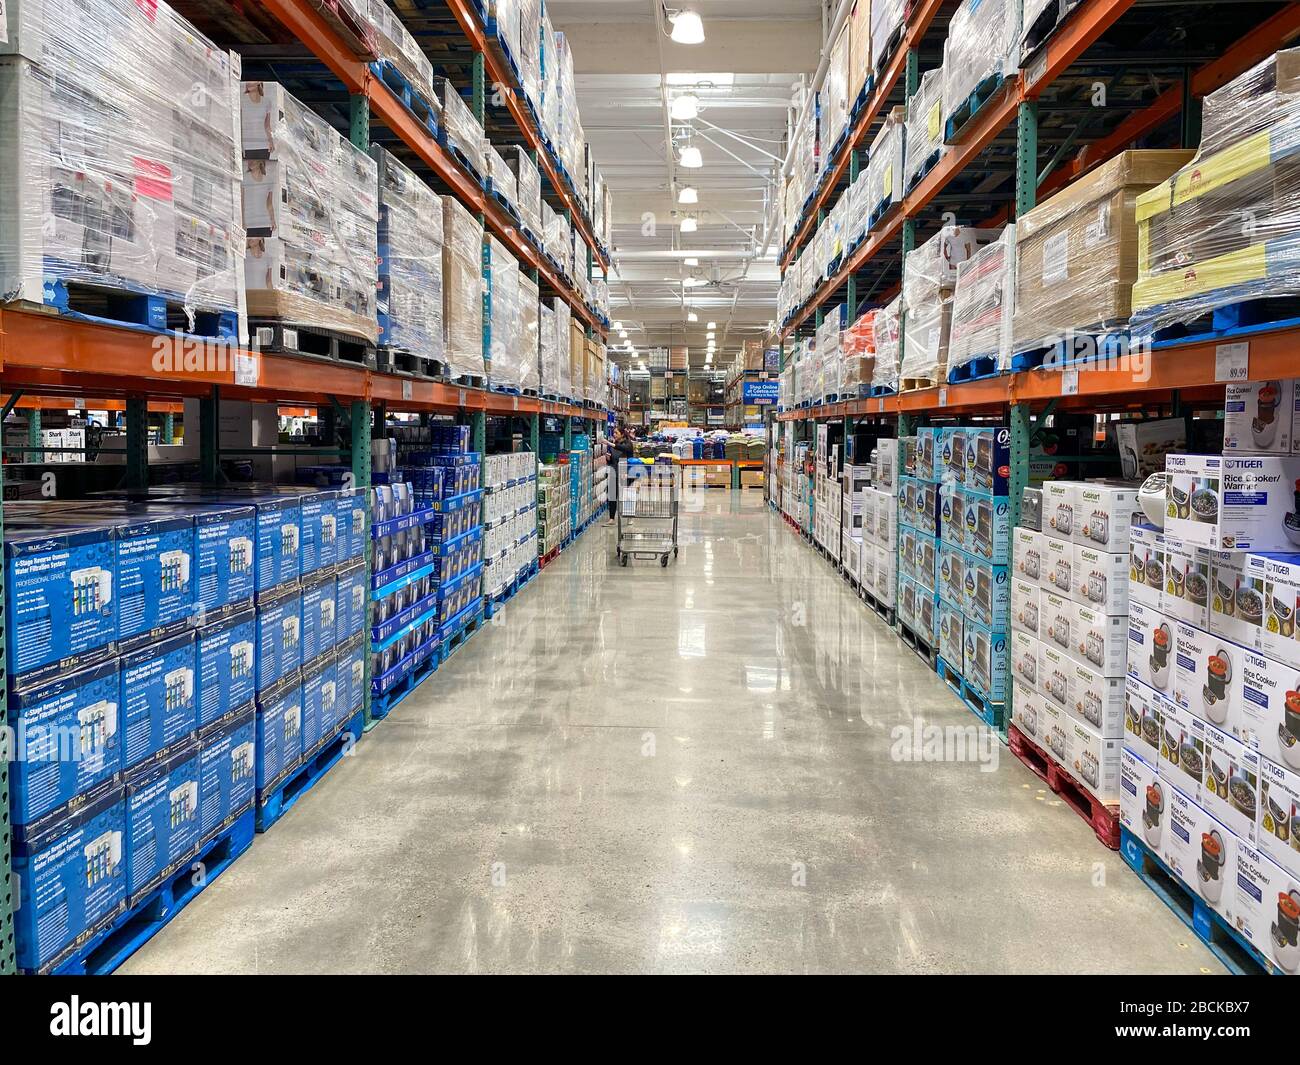 https://c8.alamy.com/comp/2BCKBX7/ailse-in-a-costco-store-different-products-costco-wholesale-corporation-is-the-largest-membership-only-warehouse-club-in-us-san-diego-usa-april-2BCKBX7.jpg